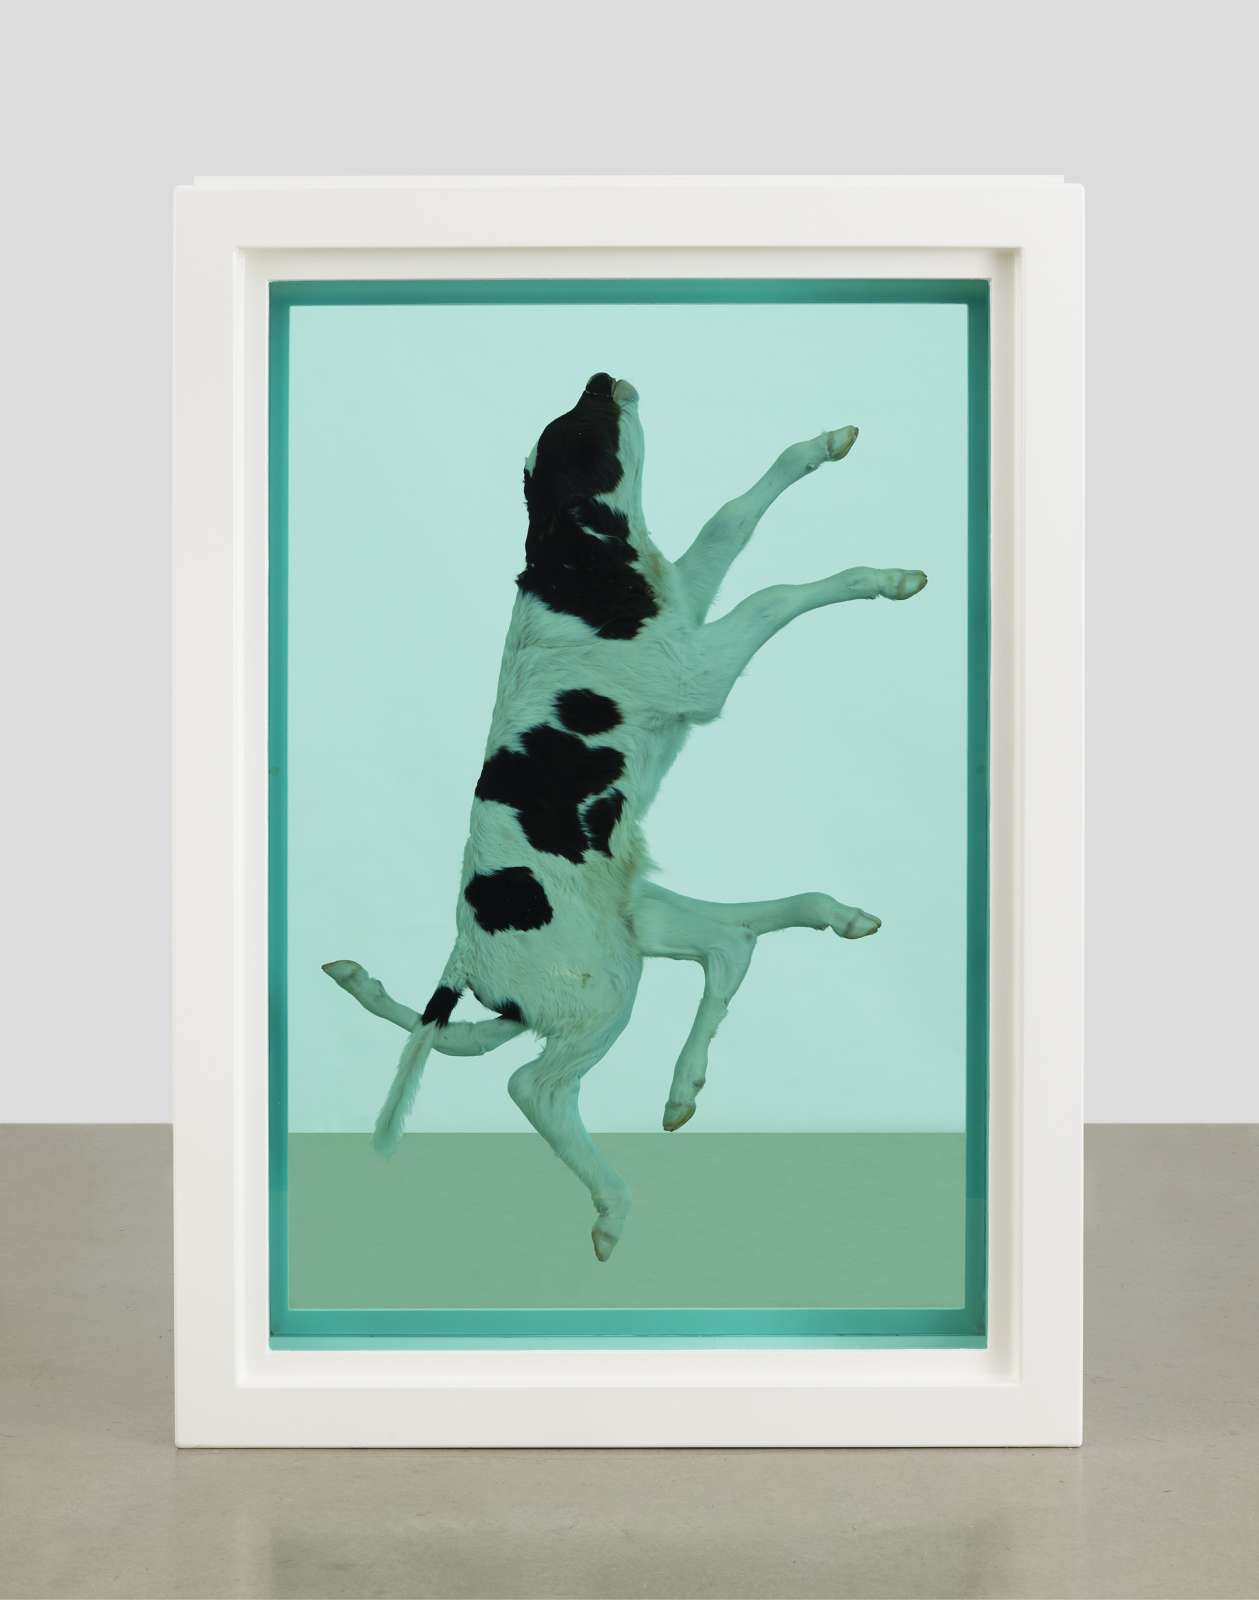 Damien Hirst, The Ascension, 2003